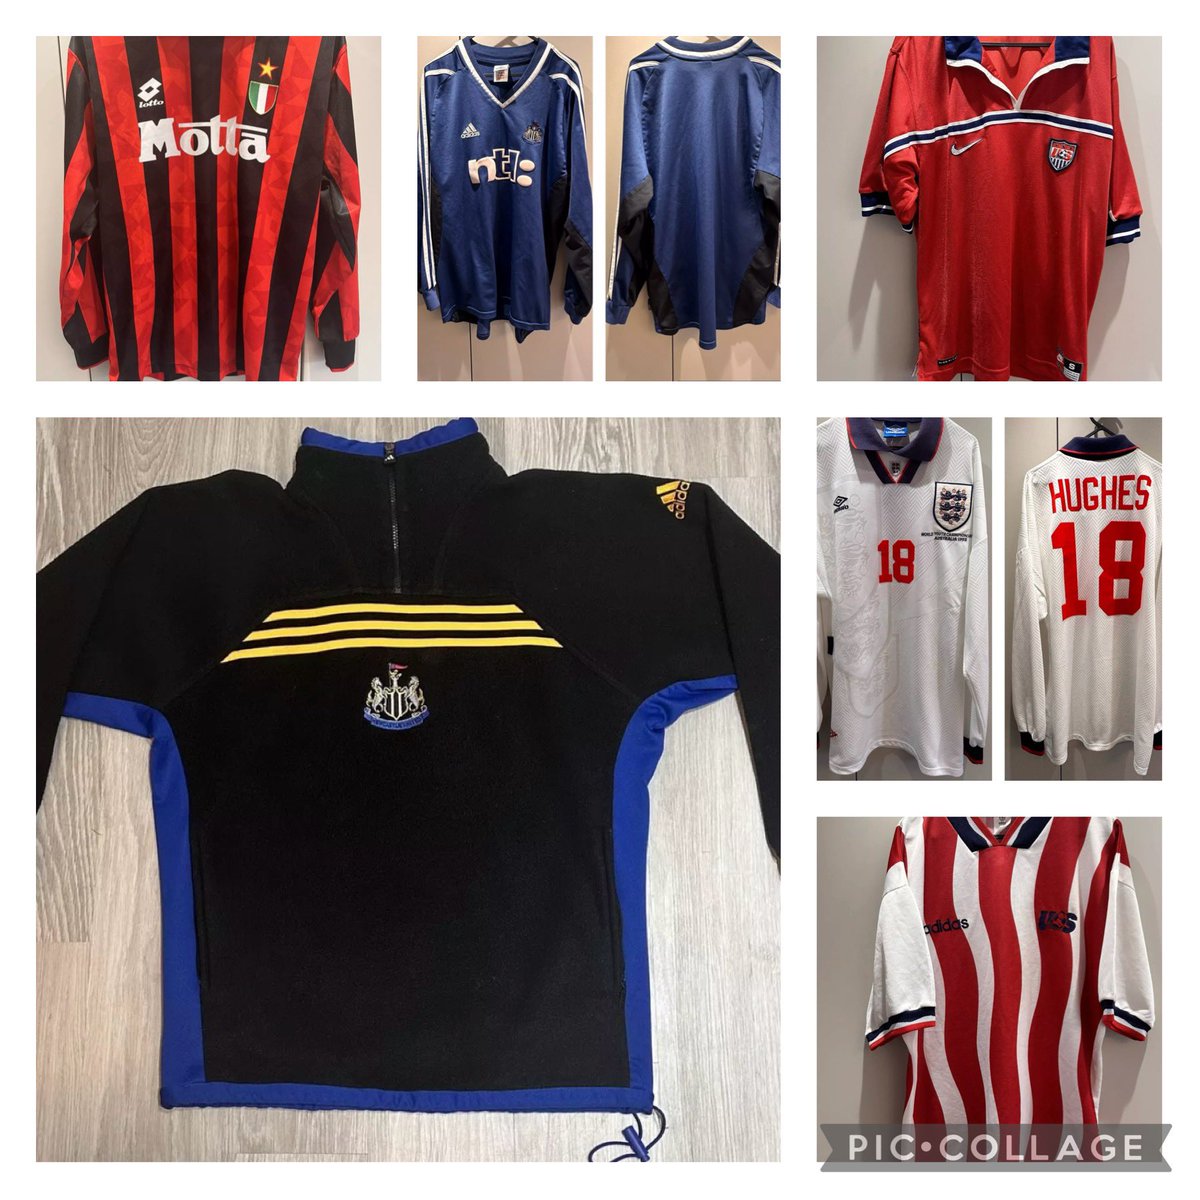 ⚽️ GRAILS 4 SALE ⚽️ ⚽️ Some serious heat 🔥currently on eBay. I have around 500 shirts which I won’t be able to list until I’m back from USA due to a very busy printing schedule (much appreciated guys 👏🏻) ebay.co.uk/usr/hugoviana45 🚨 USA 1994 🚨 90’s NUFC Fleece 🚨 Match worn